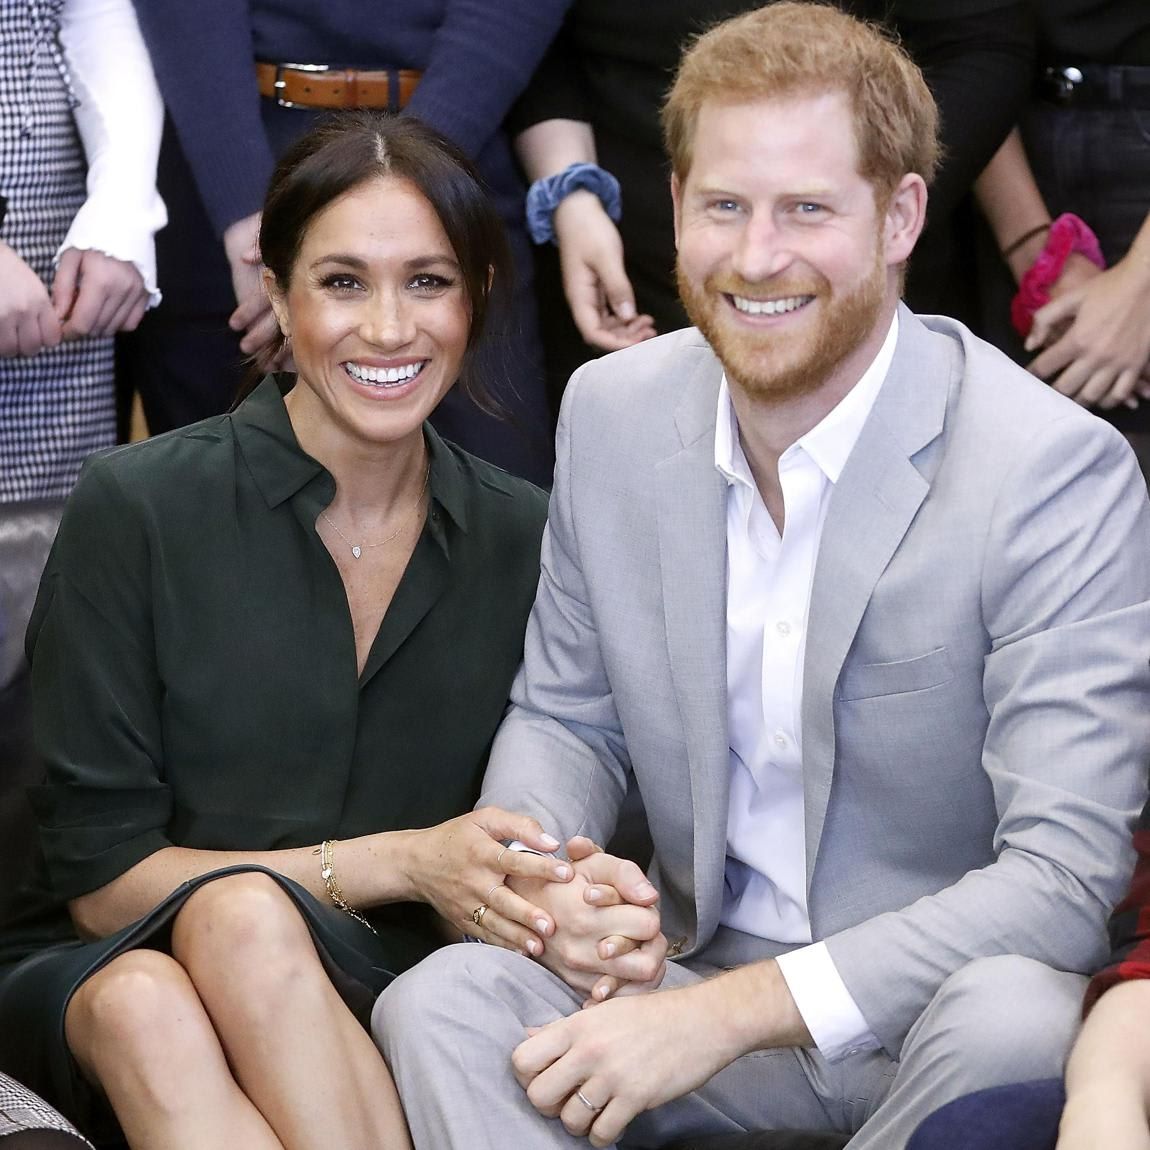 The Duke and Duchess stepped away from royal duties in March of 2020